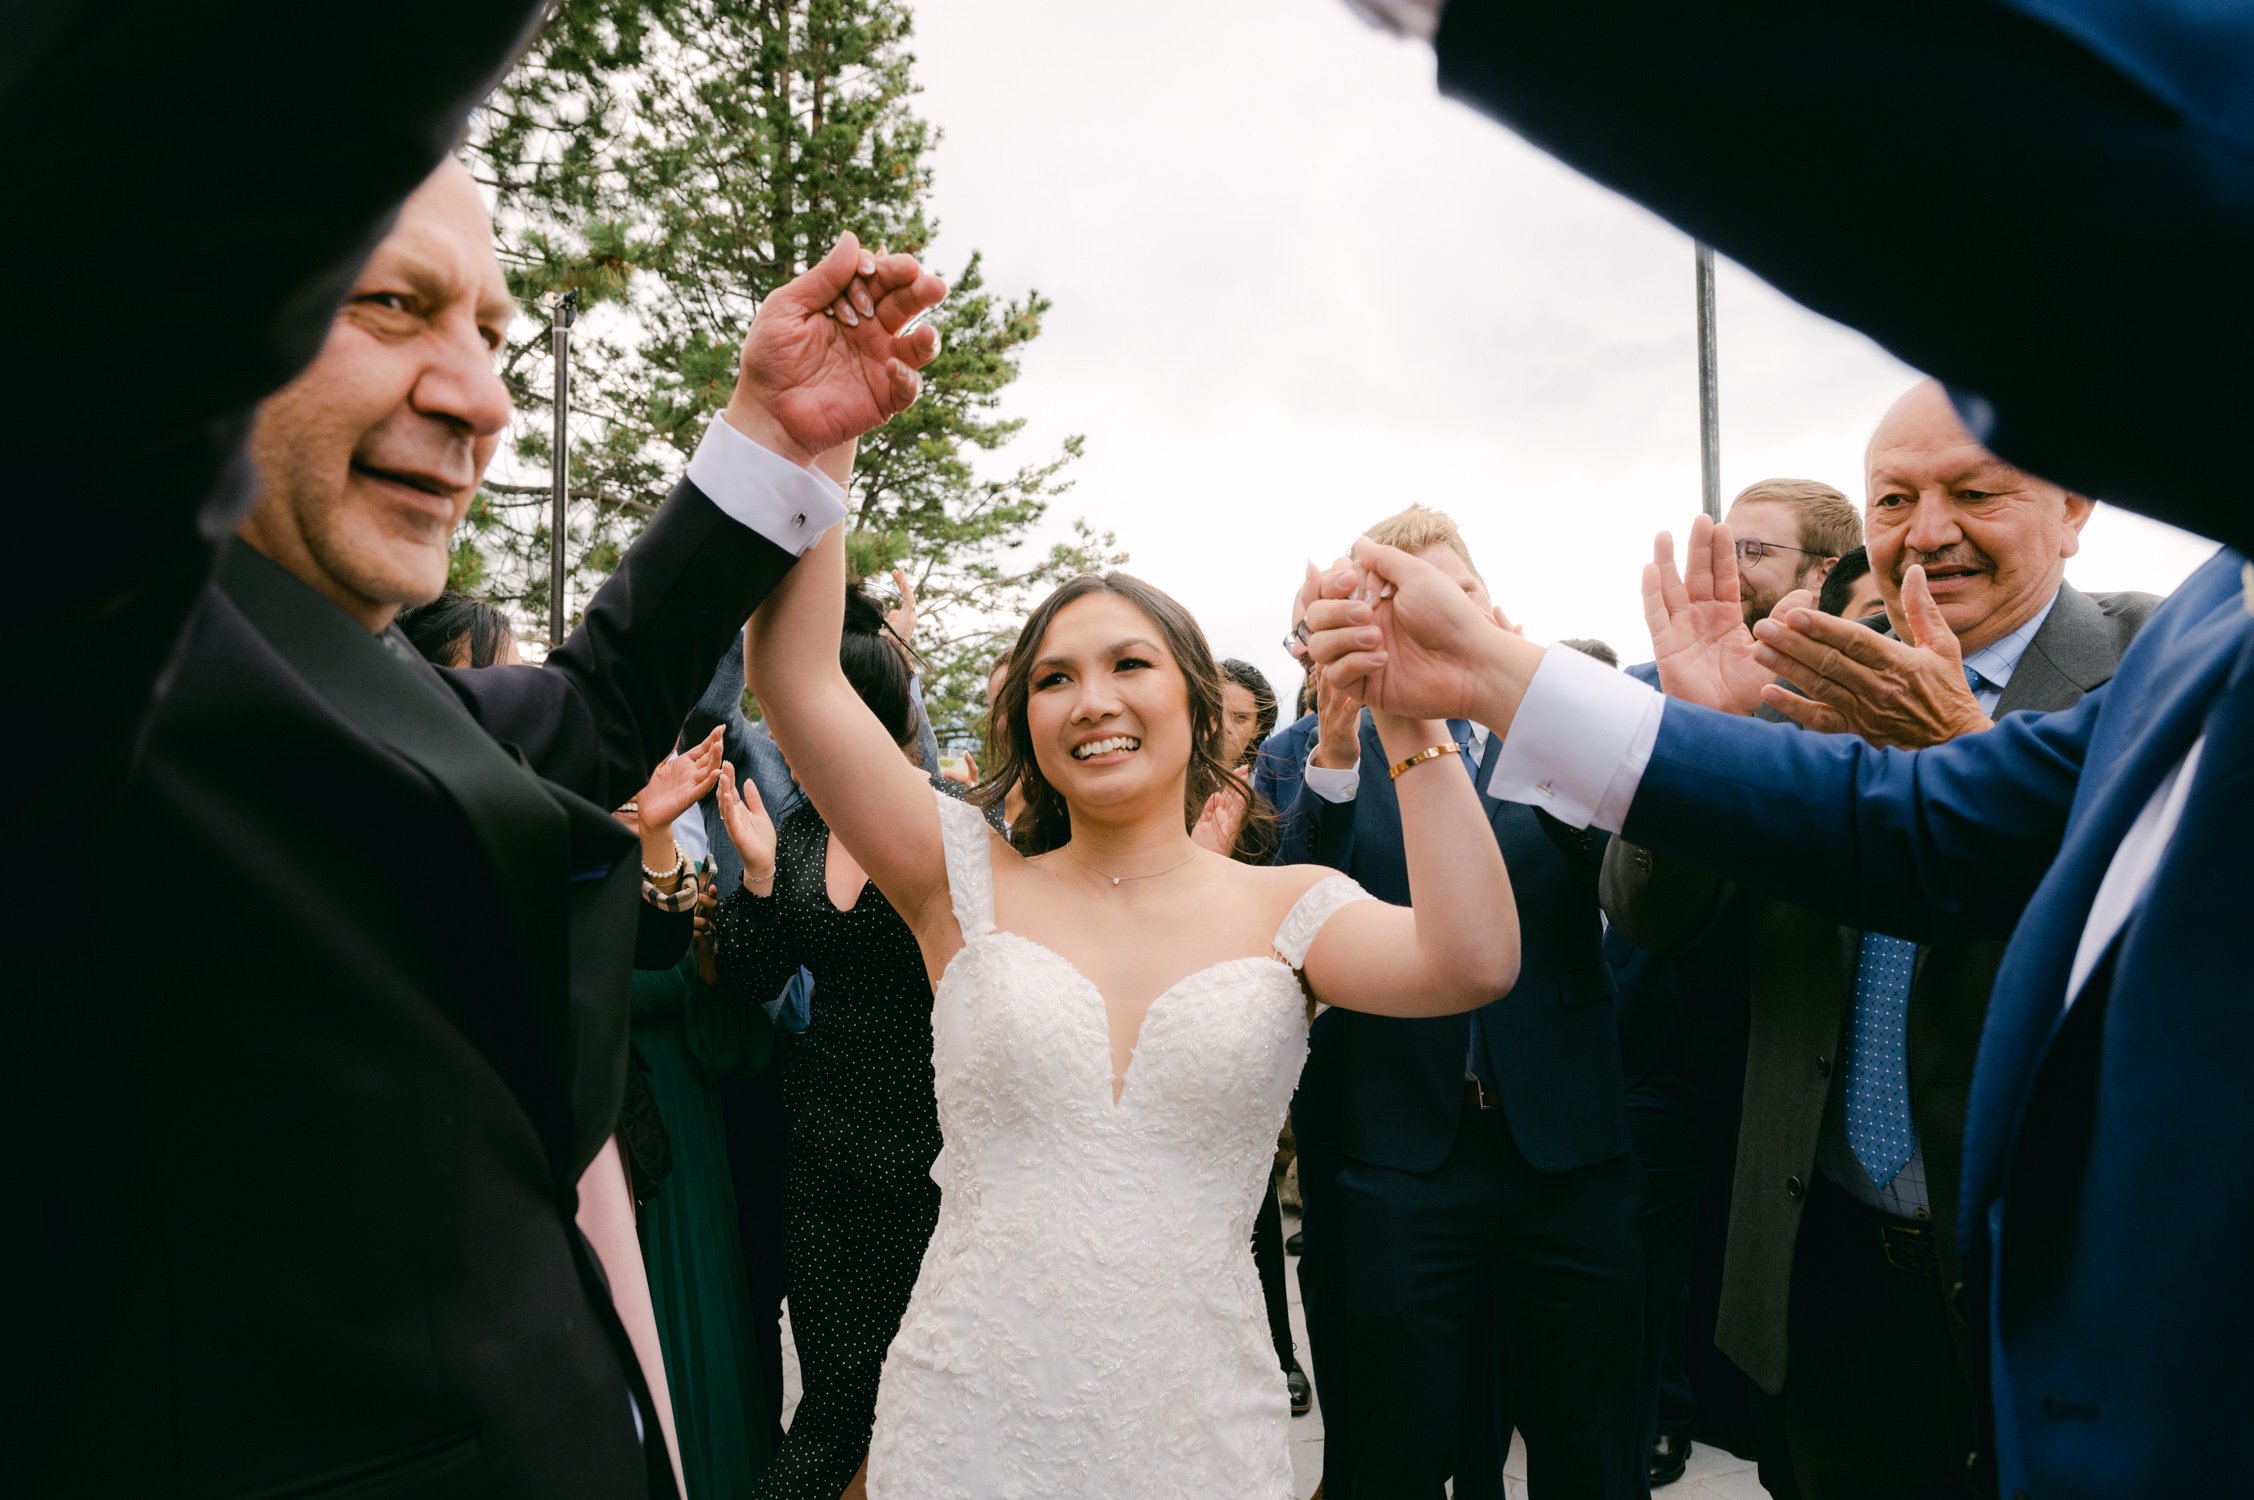 Edgewood Tahoe Wedding photos: photo of bride dancing with the zaffa drummers